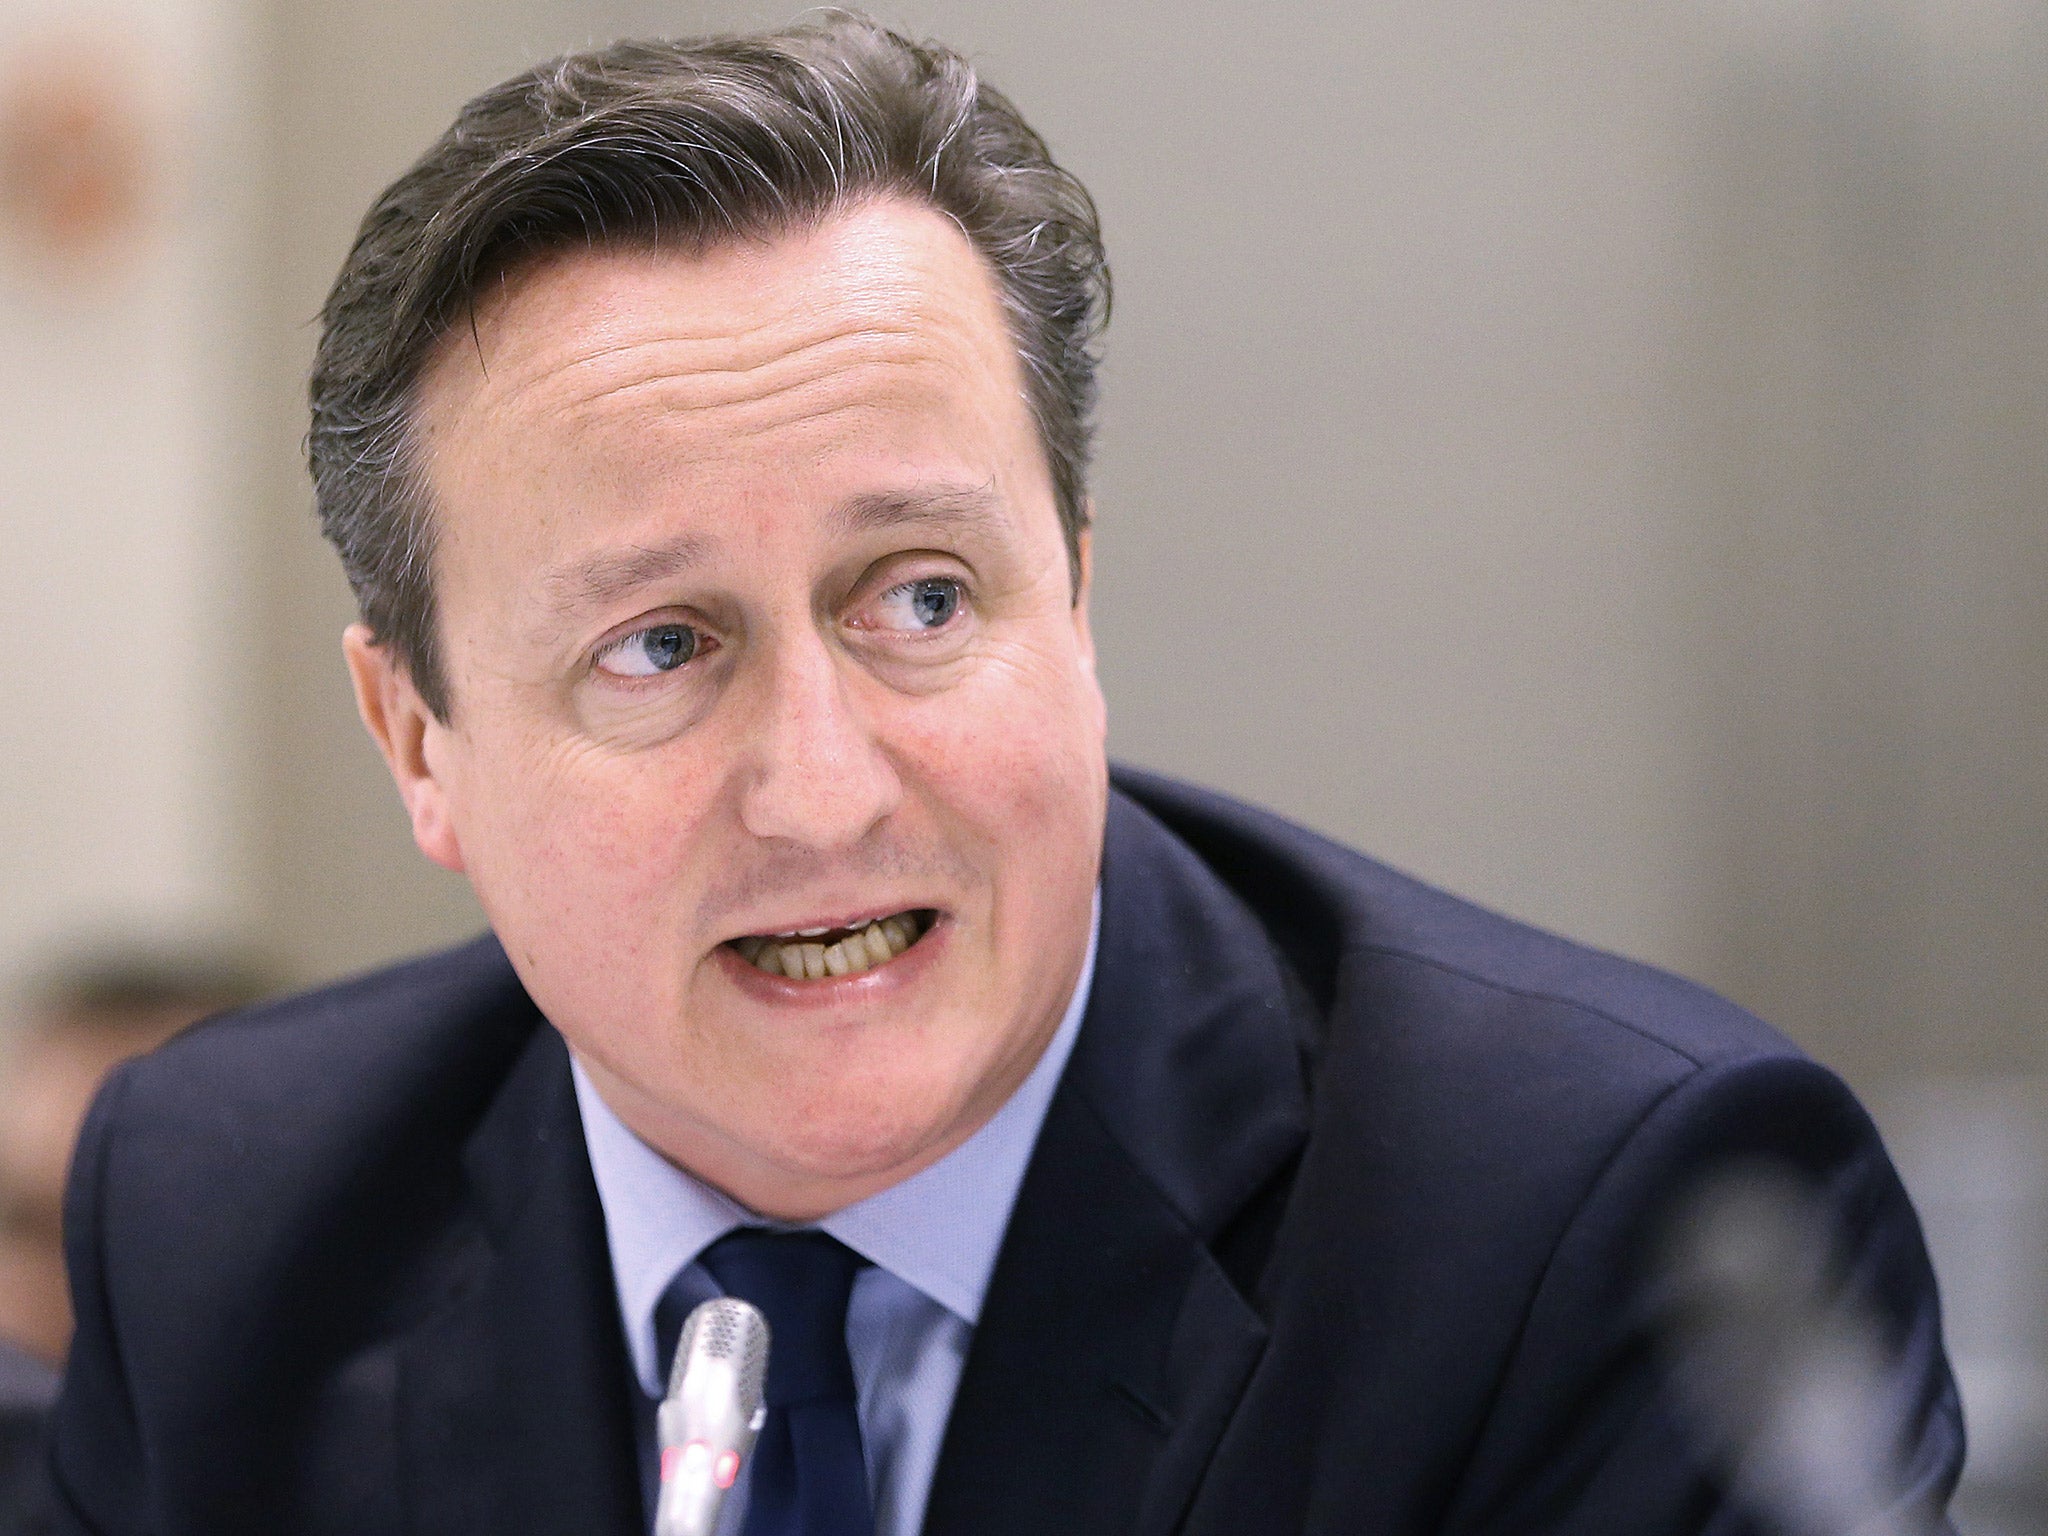 David Cameron and the Tories will place emphasis on the economy